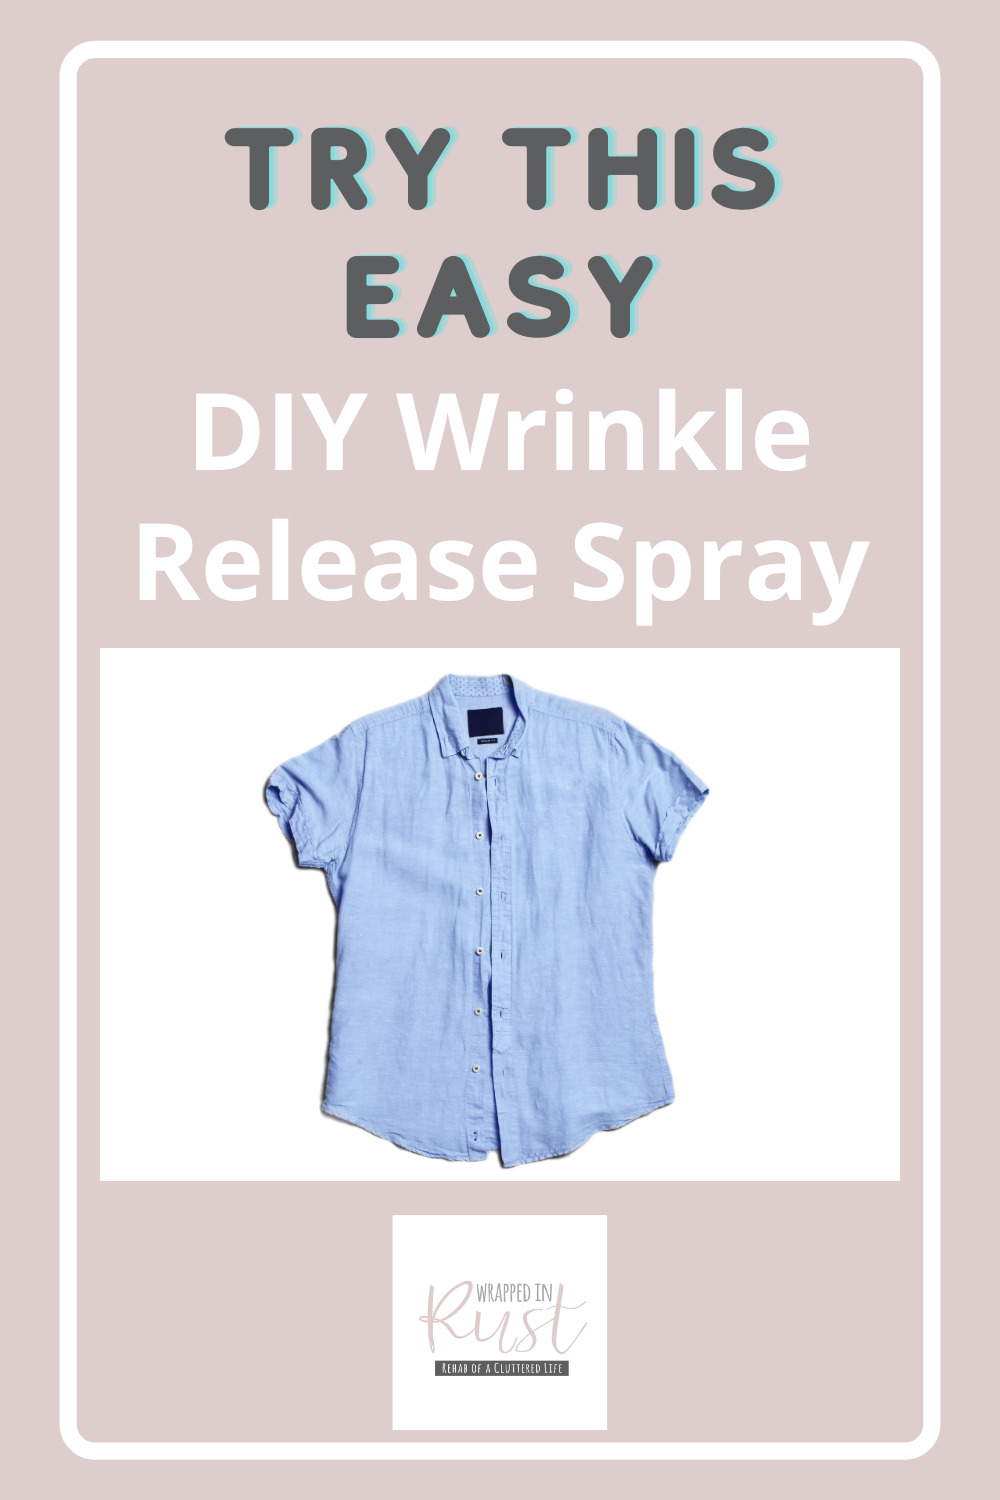 Wrappedinrust.com has creative solutions for tricky cleaning projects. Keep your clothes smooth without overspending on store bought solution. Learn how to make wrinkle release spray all on your own!